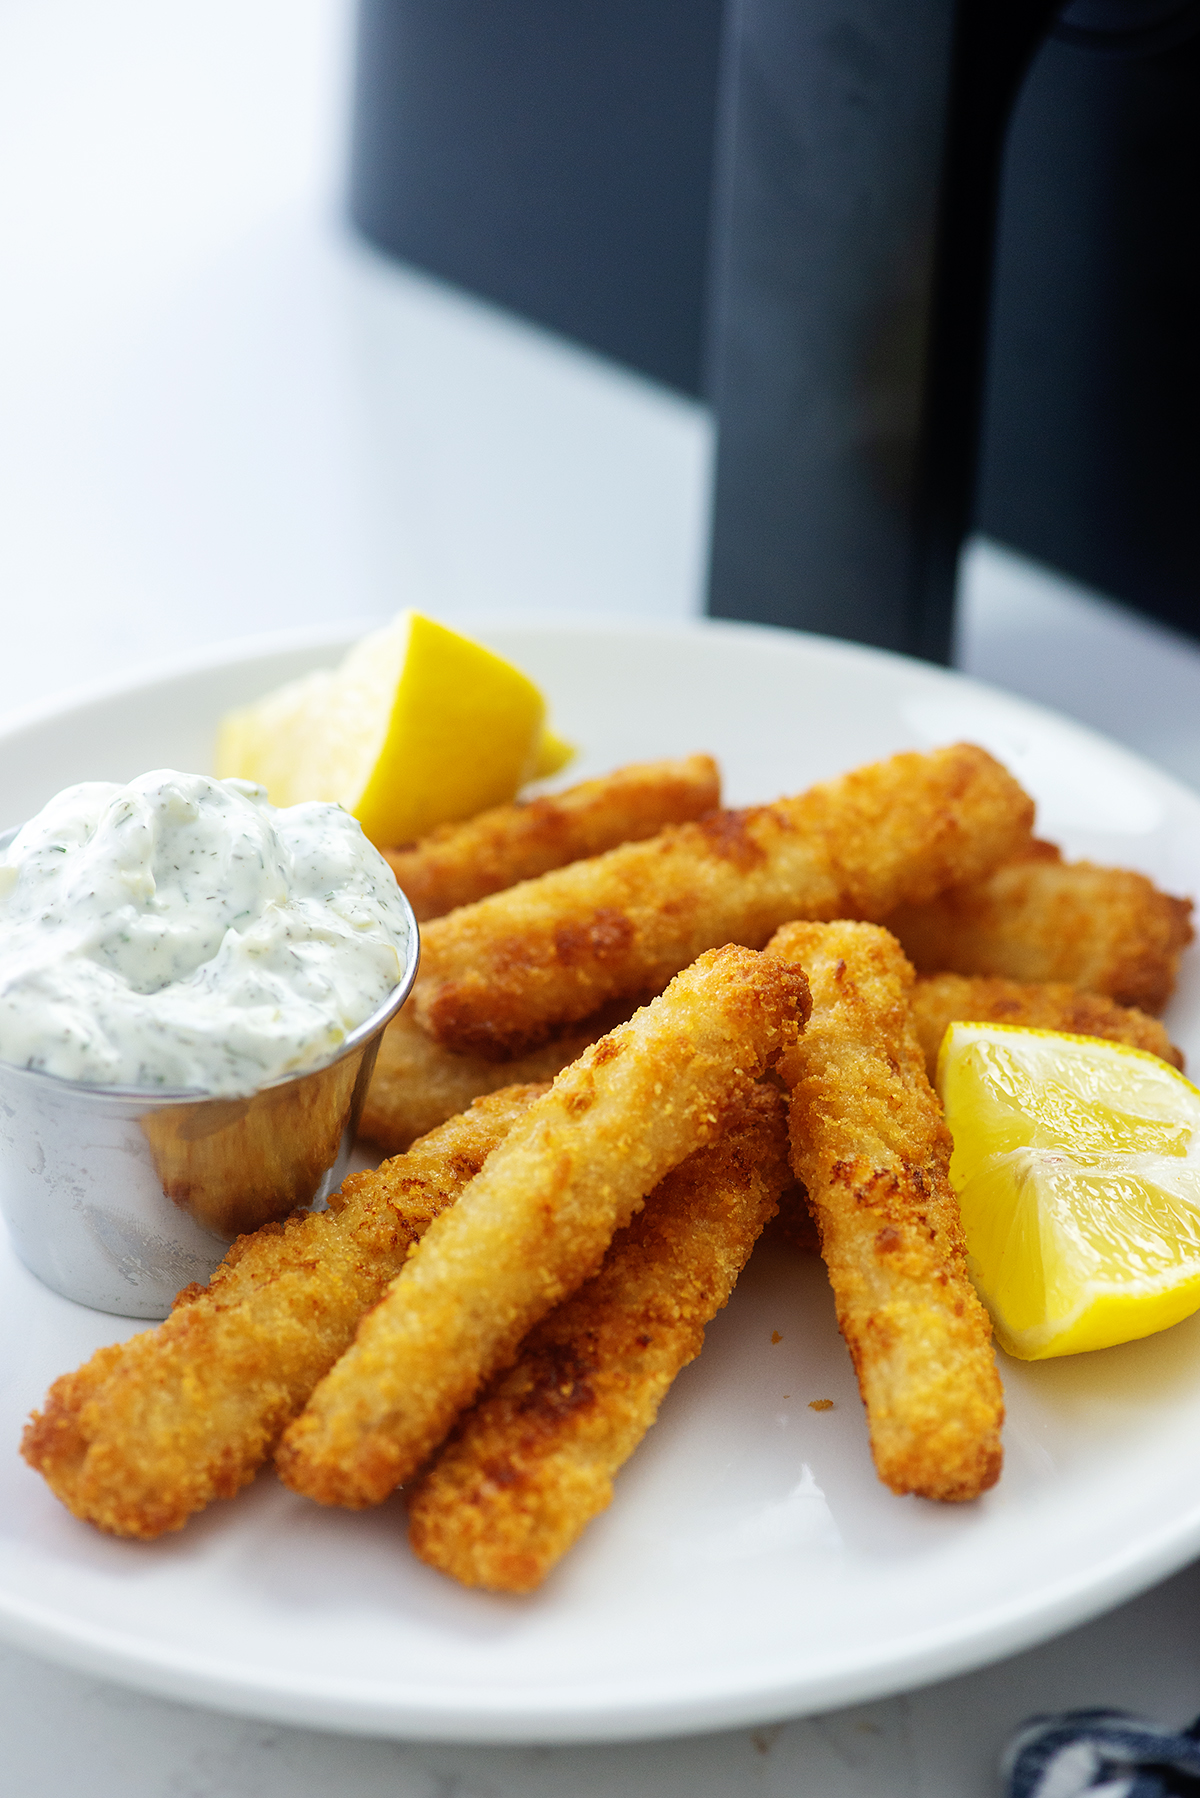 Fish sticks piled on a white plate